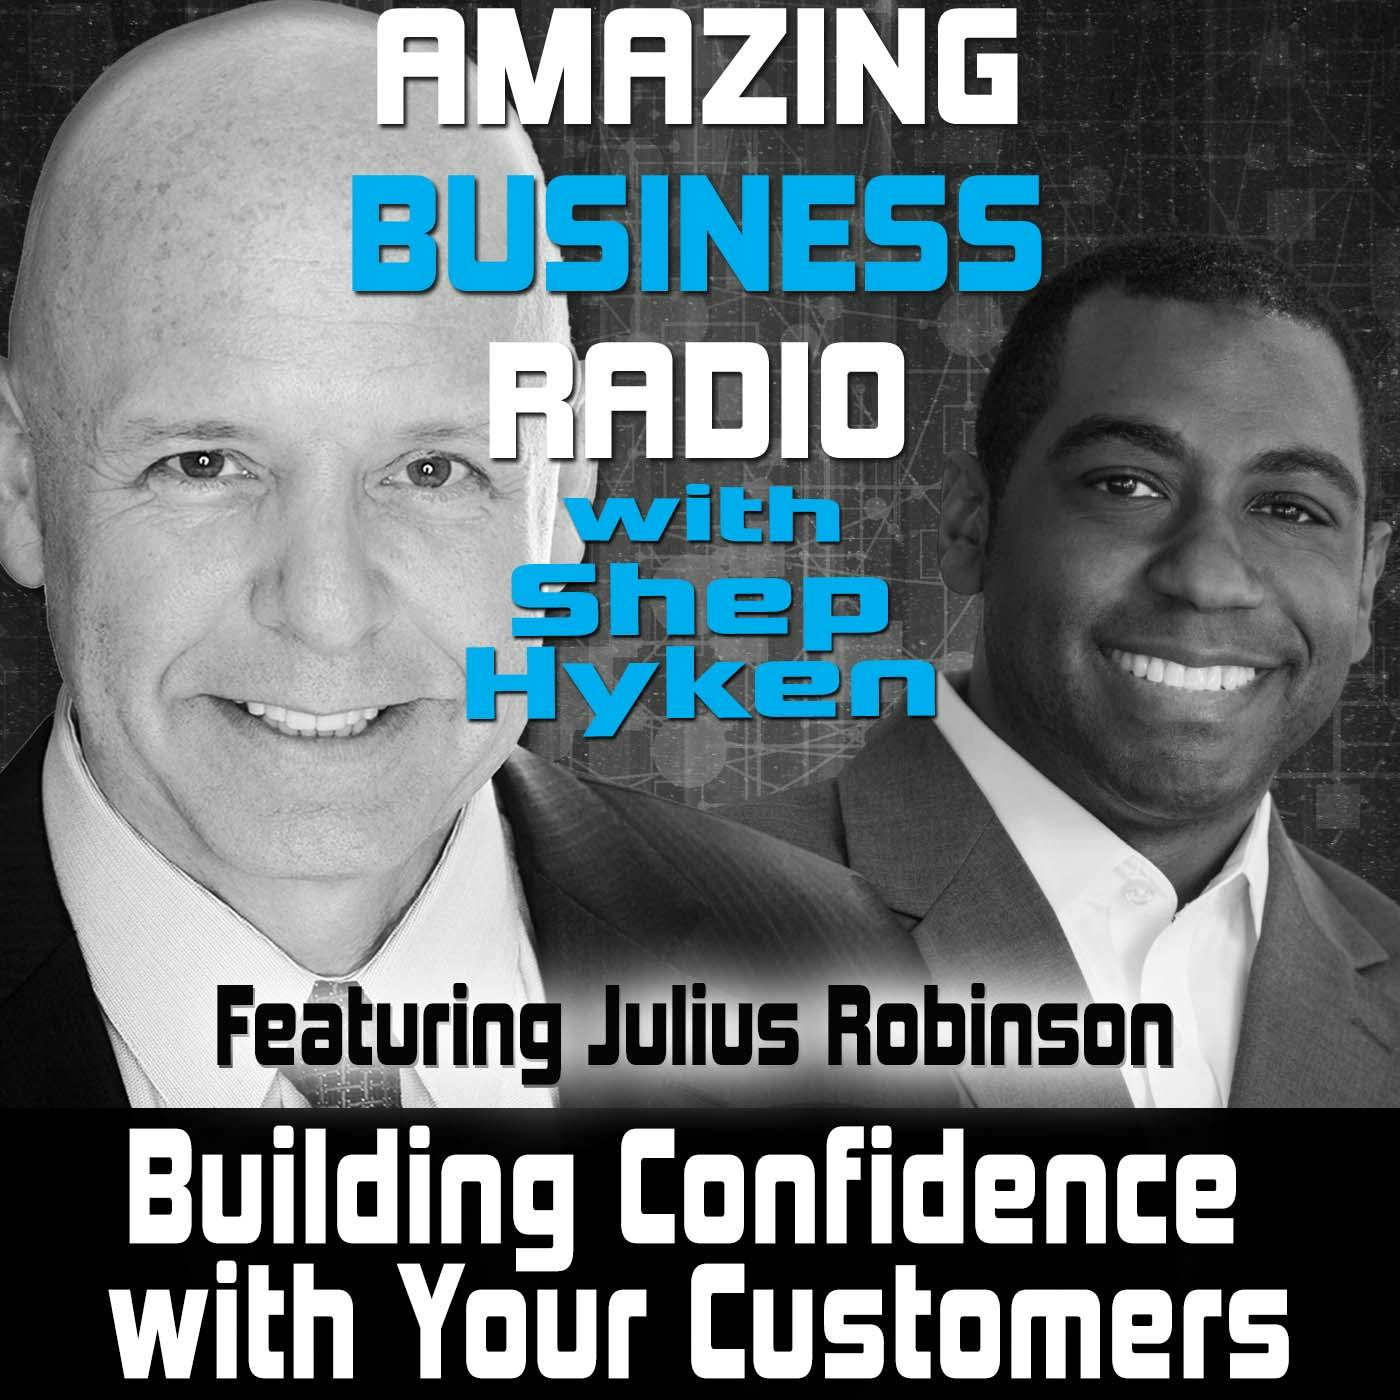 Building Confidence with Your Customers Featuring Julius Robinson